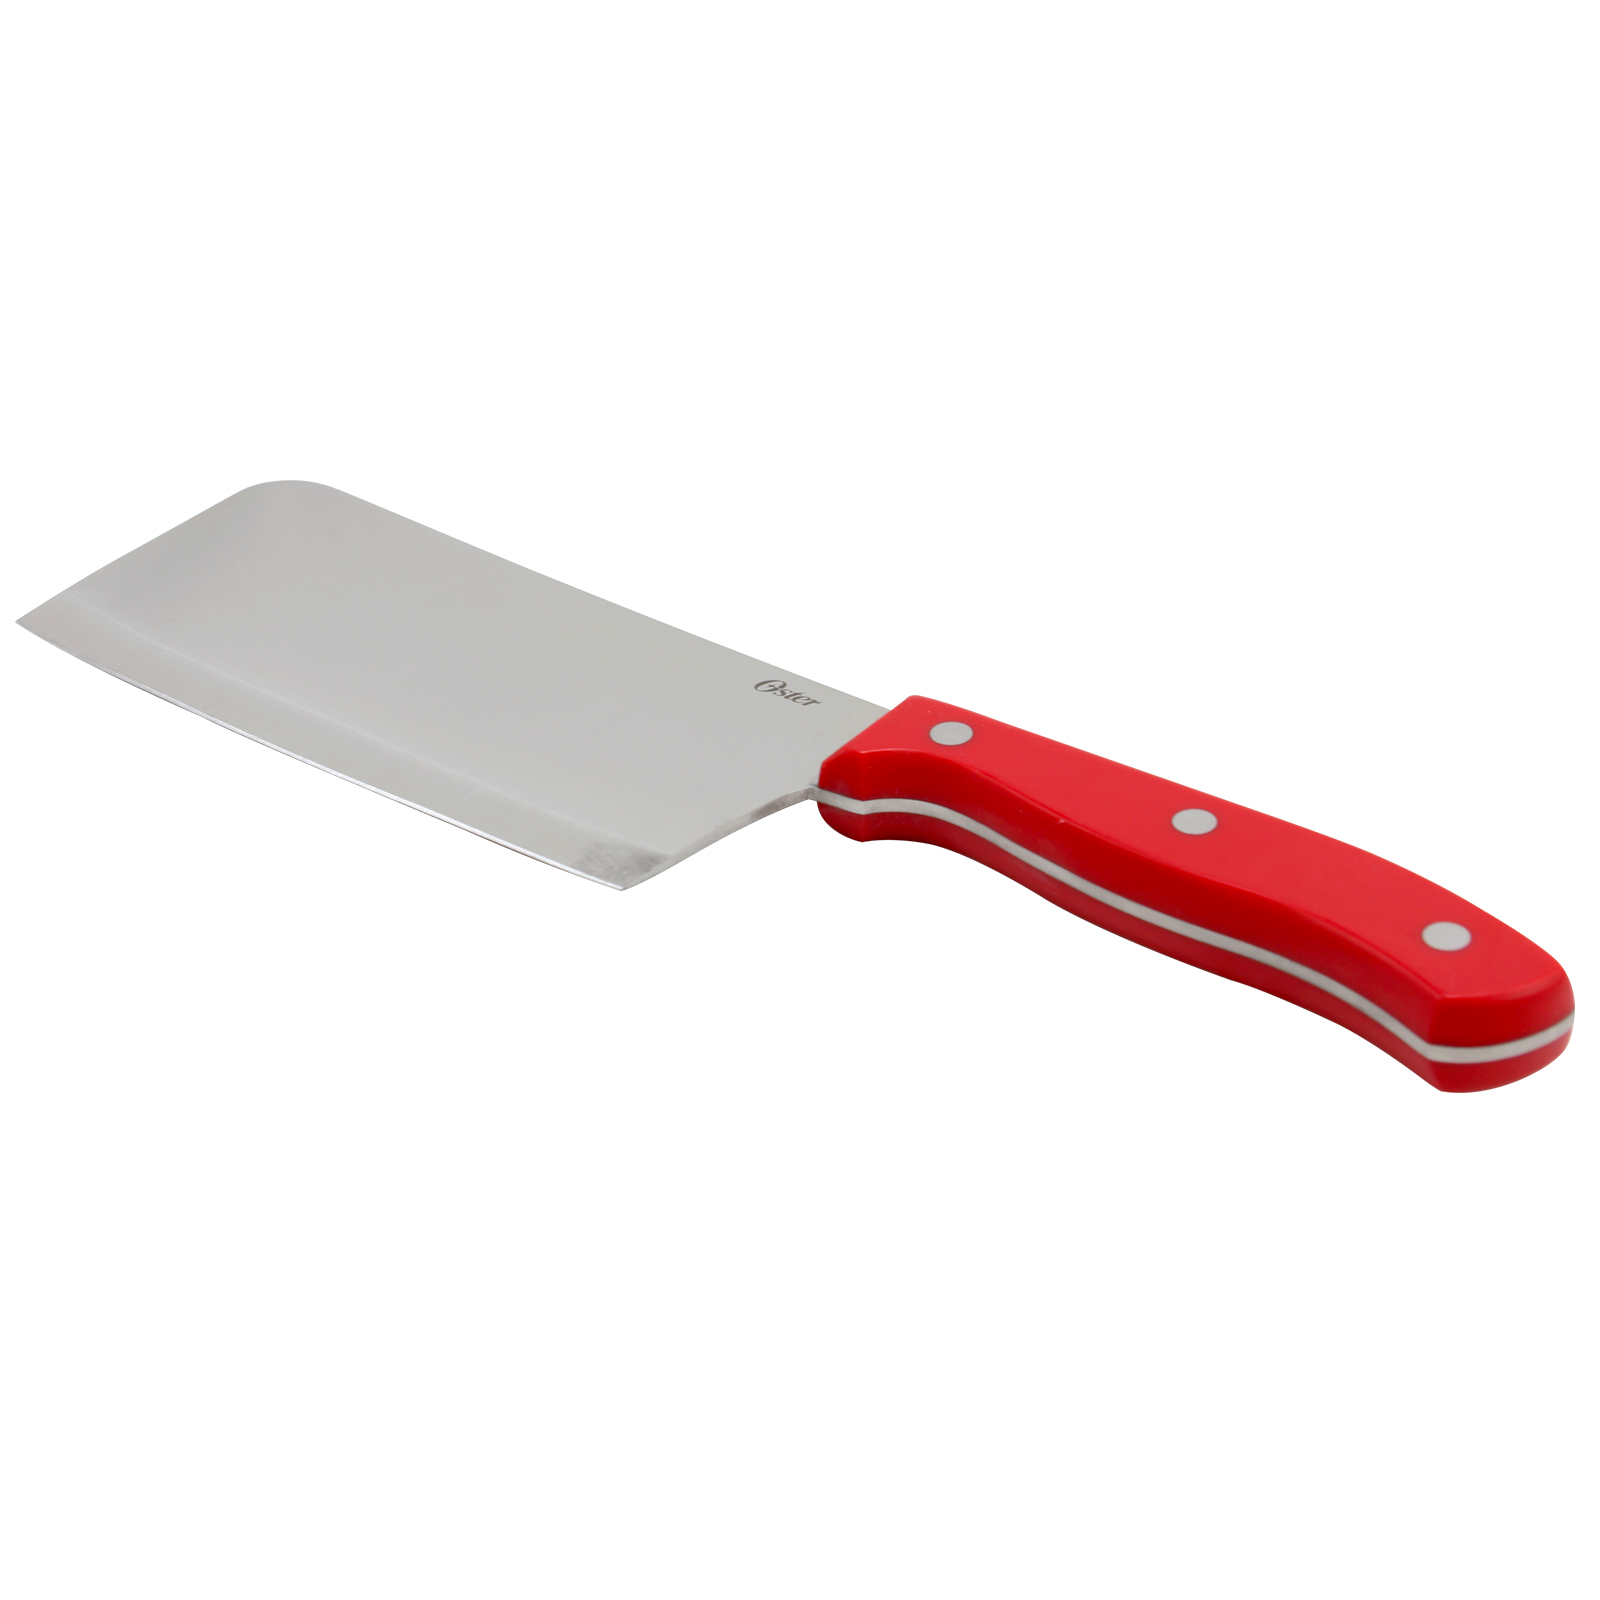 Oster Evansville 6 inch Cleaver with Red Handle